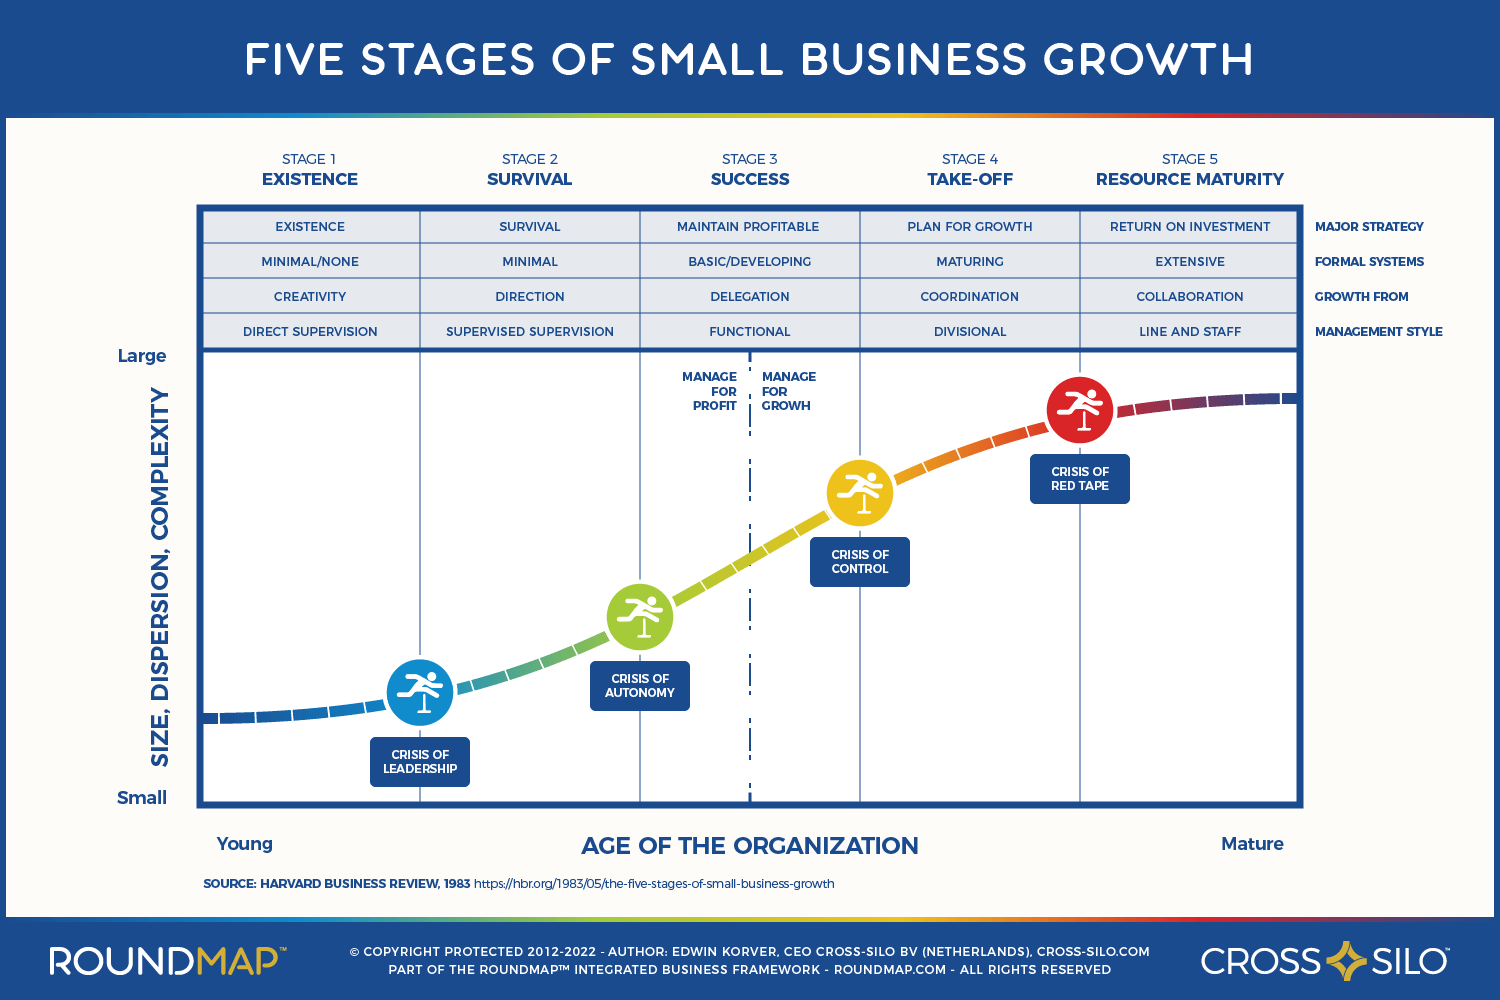 ROUNDMAP_Slide_Five_Stages_Small_Business_growth_Copyright_Protected[1]